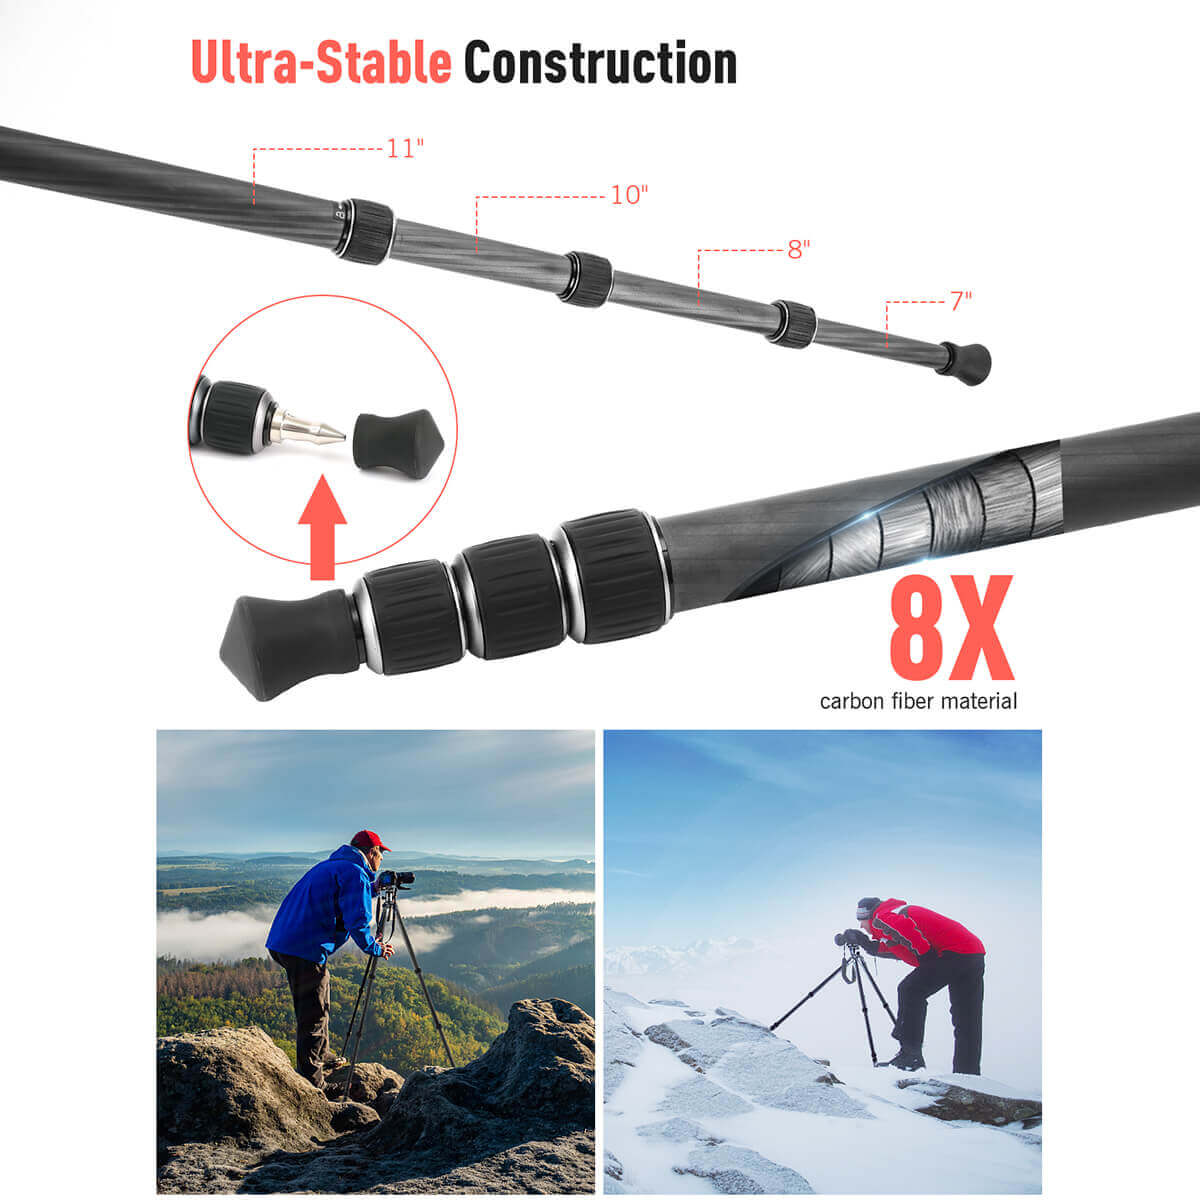 Moman CA50 travel photography tripod is made to have an ultra-stable construction with 8X carbon fiber material.